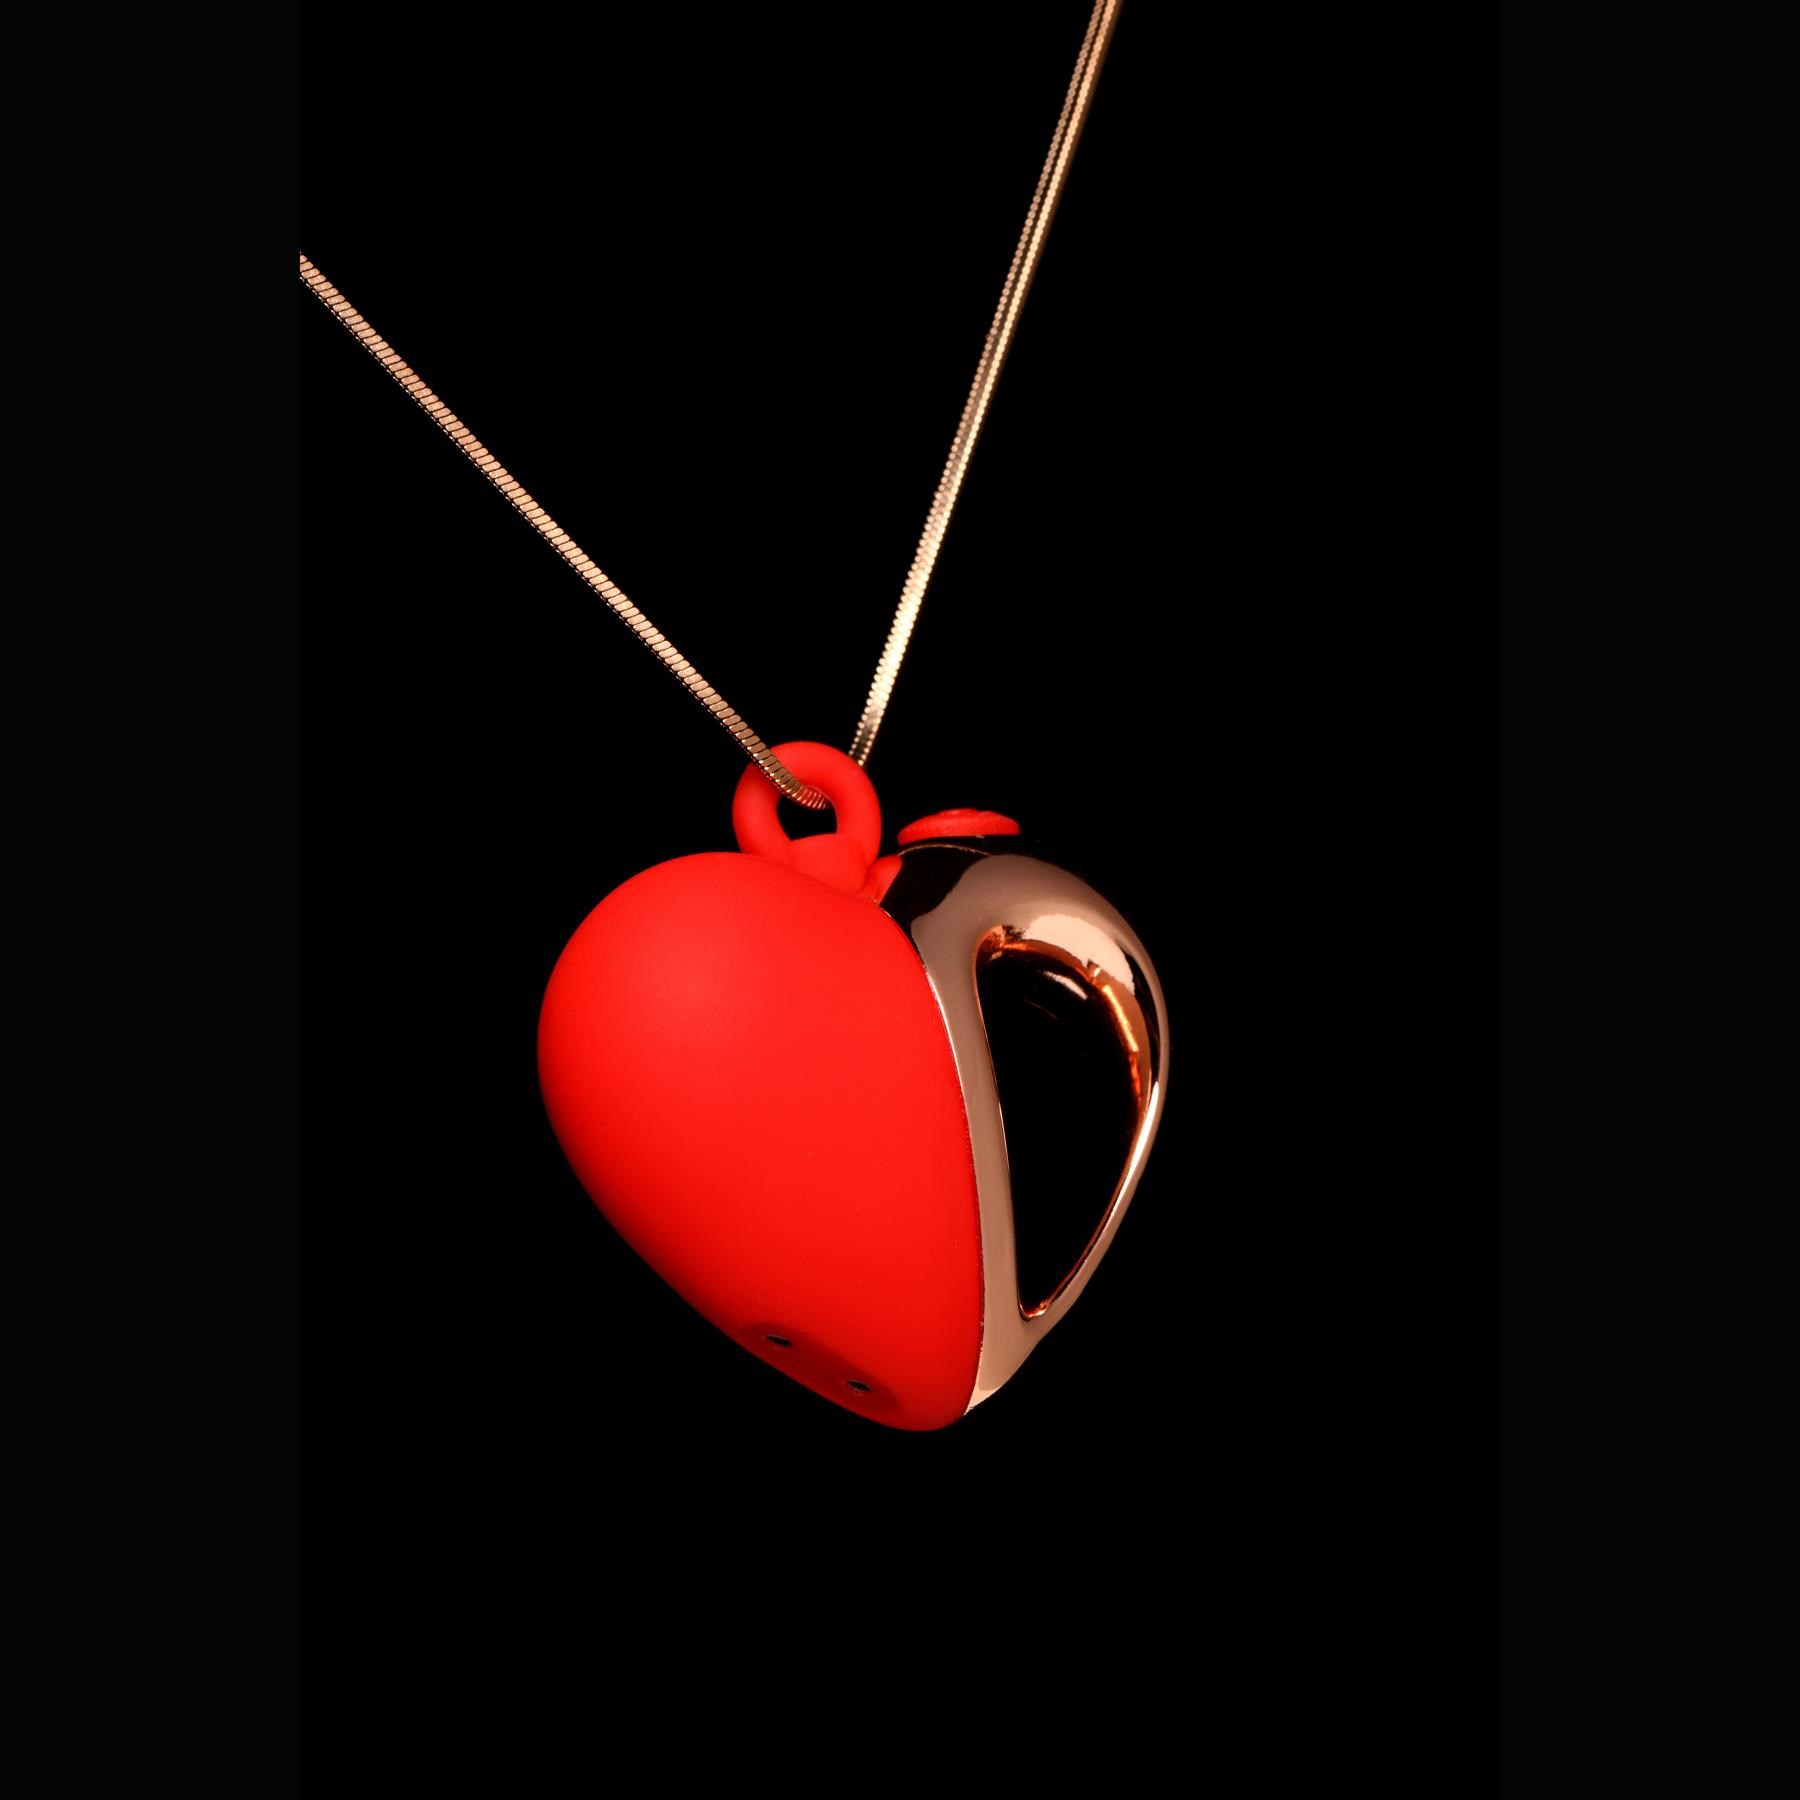 Charmed Silicone Heart Necklace - Product Shot - Black Background